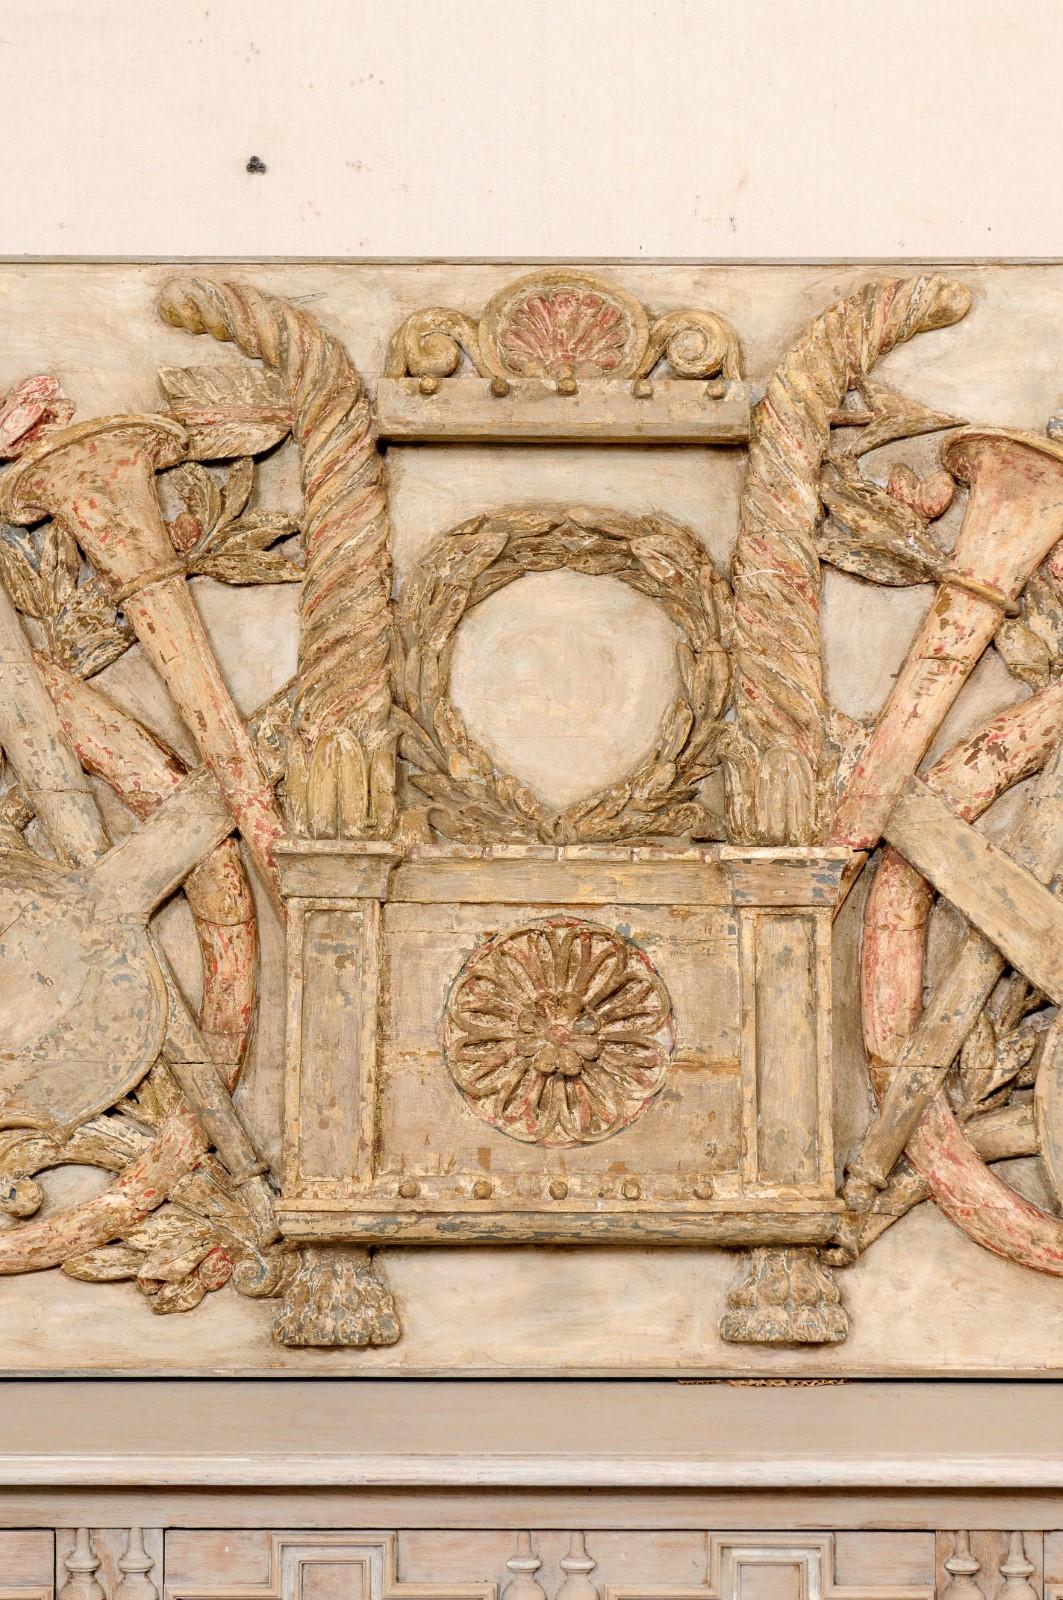 19th Century French Late 18th C. Wooden Decorative Wall Plaque in a Musical Motif (6 ft wide)